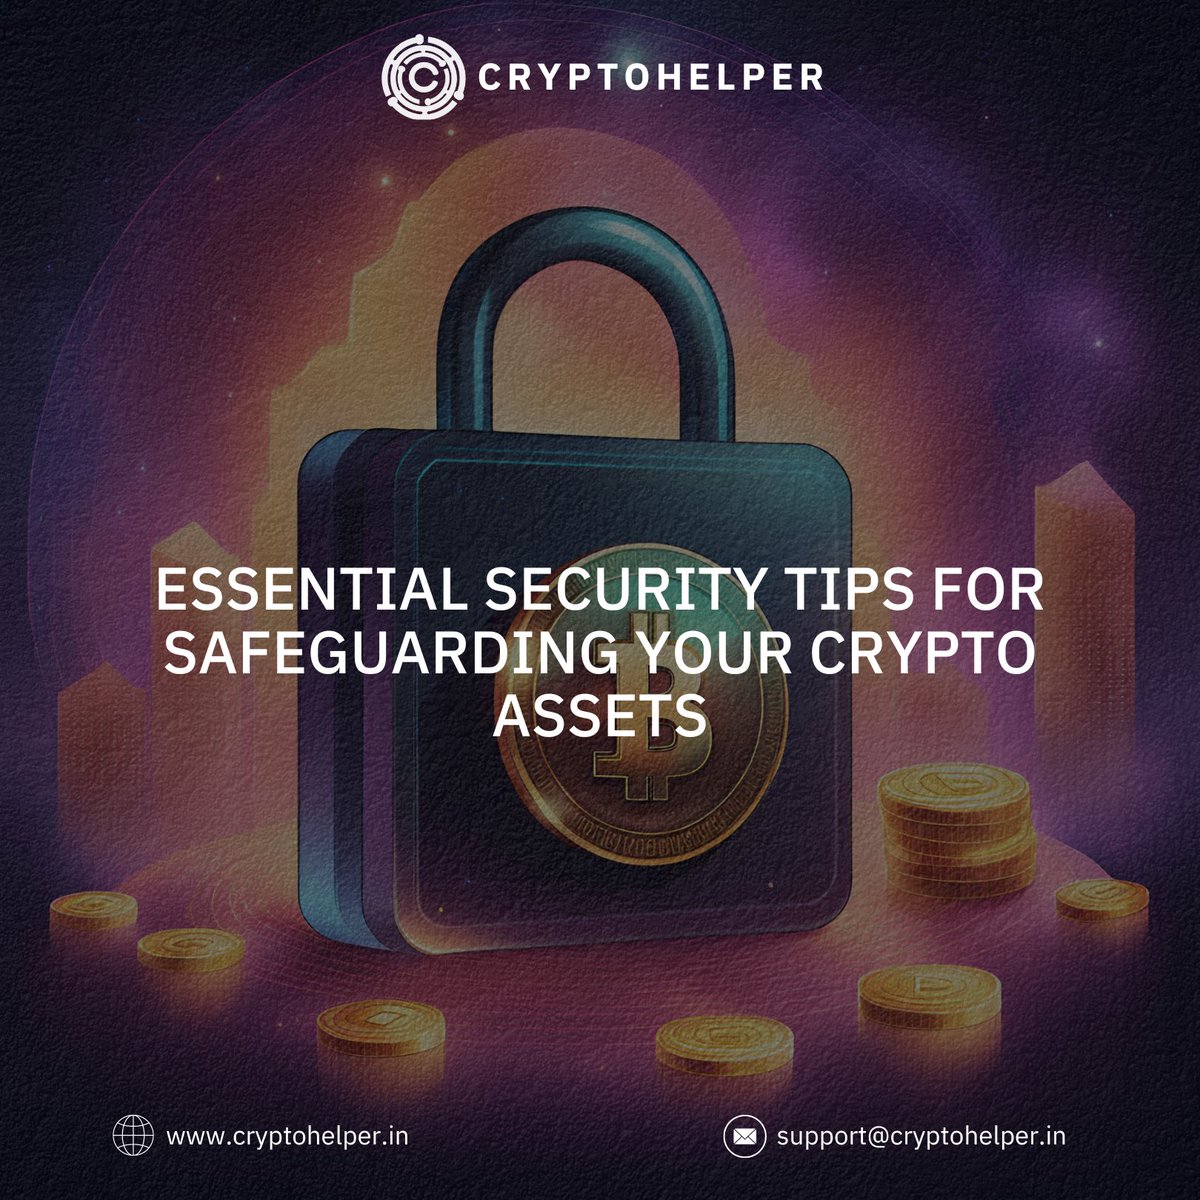 🔒 3 Essential Crypto Security Tips! 🔒

Stay Informed About Regulations: Ensure you are up-to-date with the latest cryptocurrency regulations in your region. Compliance helps protect your assets from legal risks and keeps you on the right side of the law.

Choose Reputable